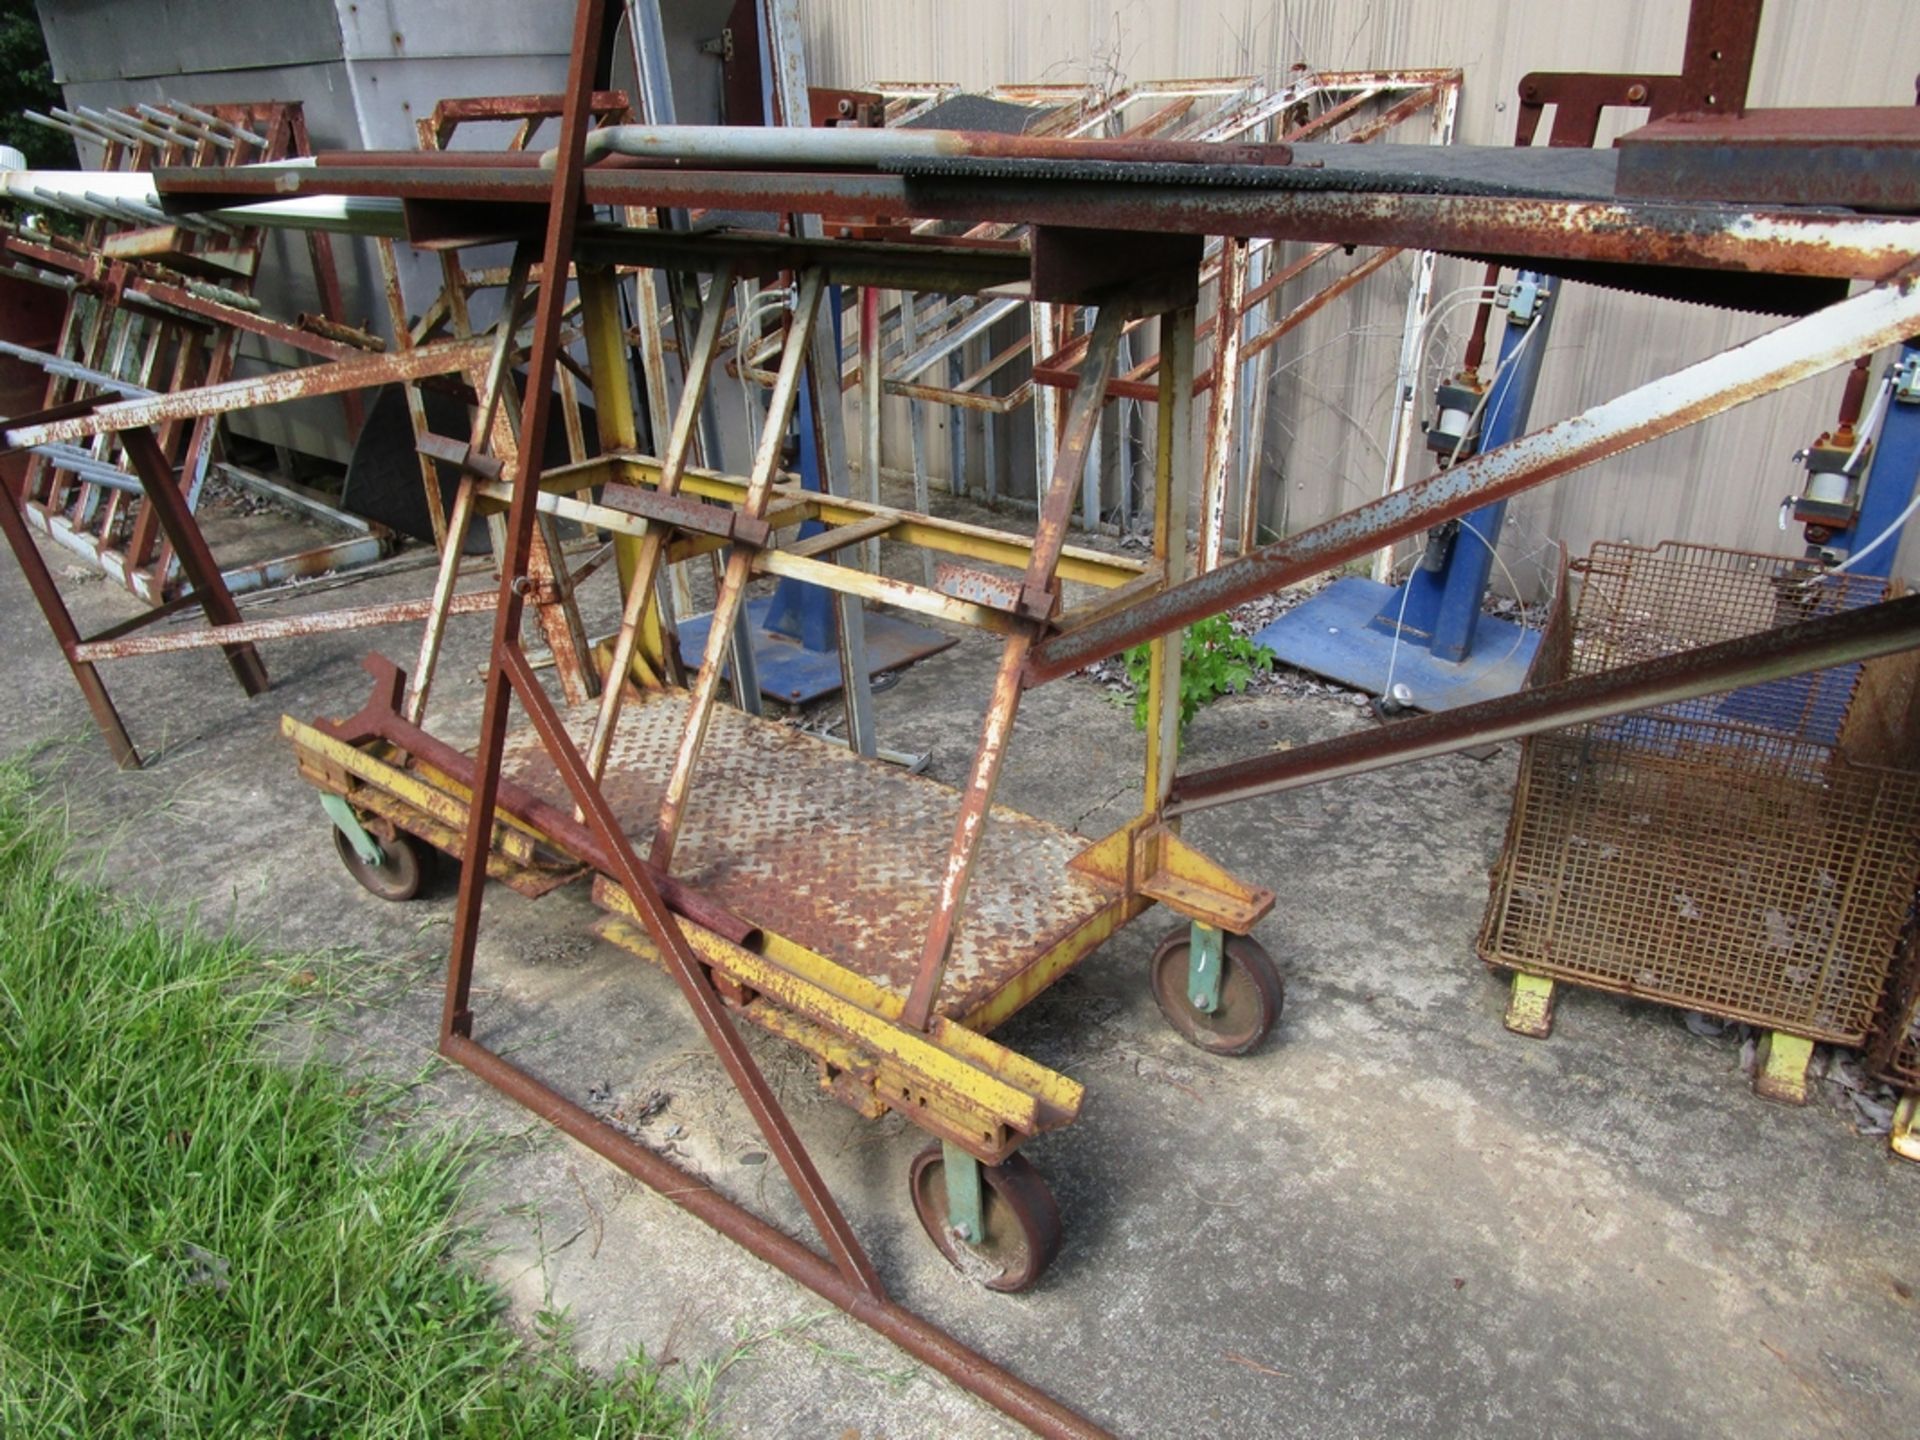 Metal A-Frame Racks And Carts In Back Of Shop - Image 3 of 3